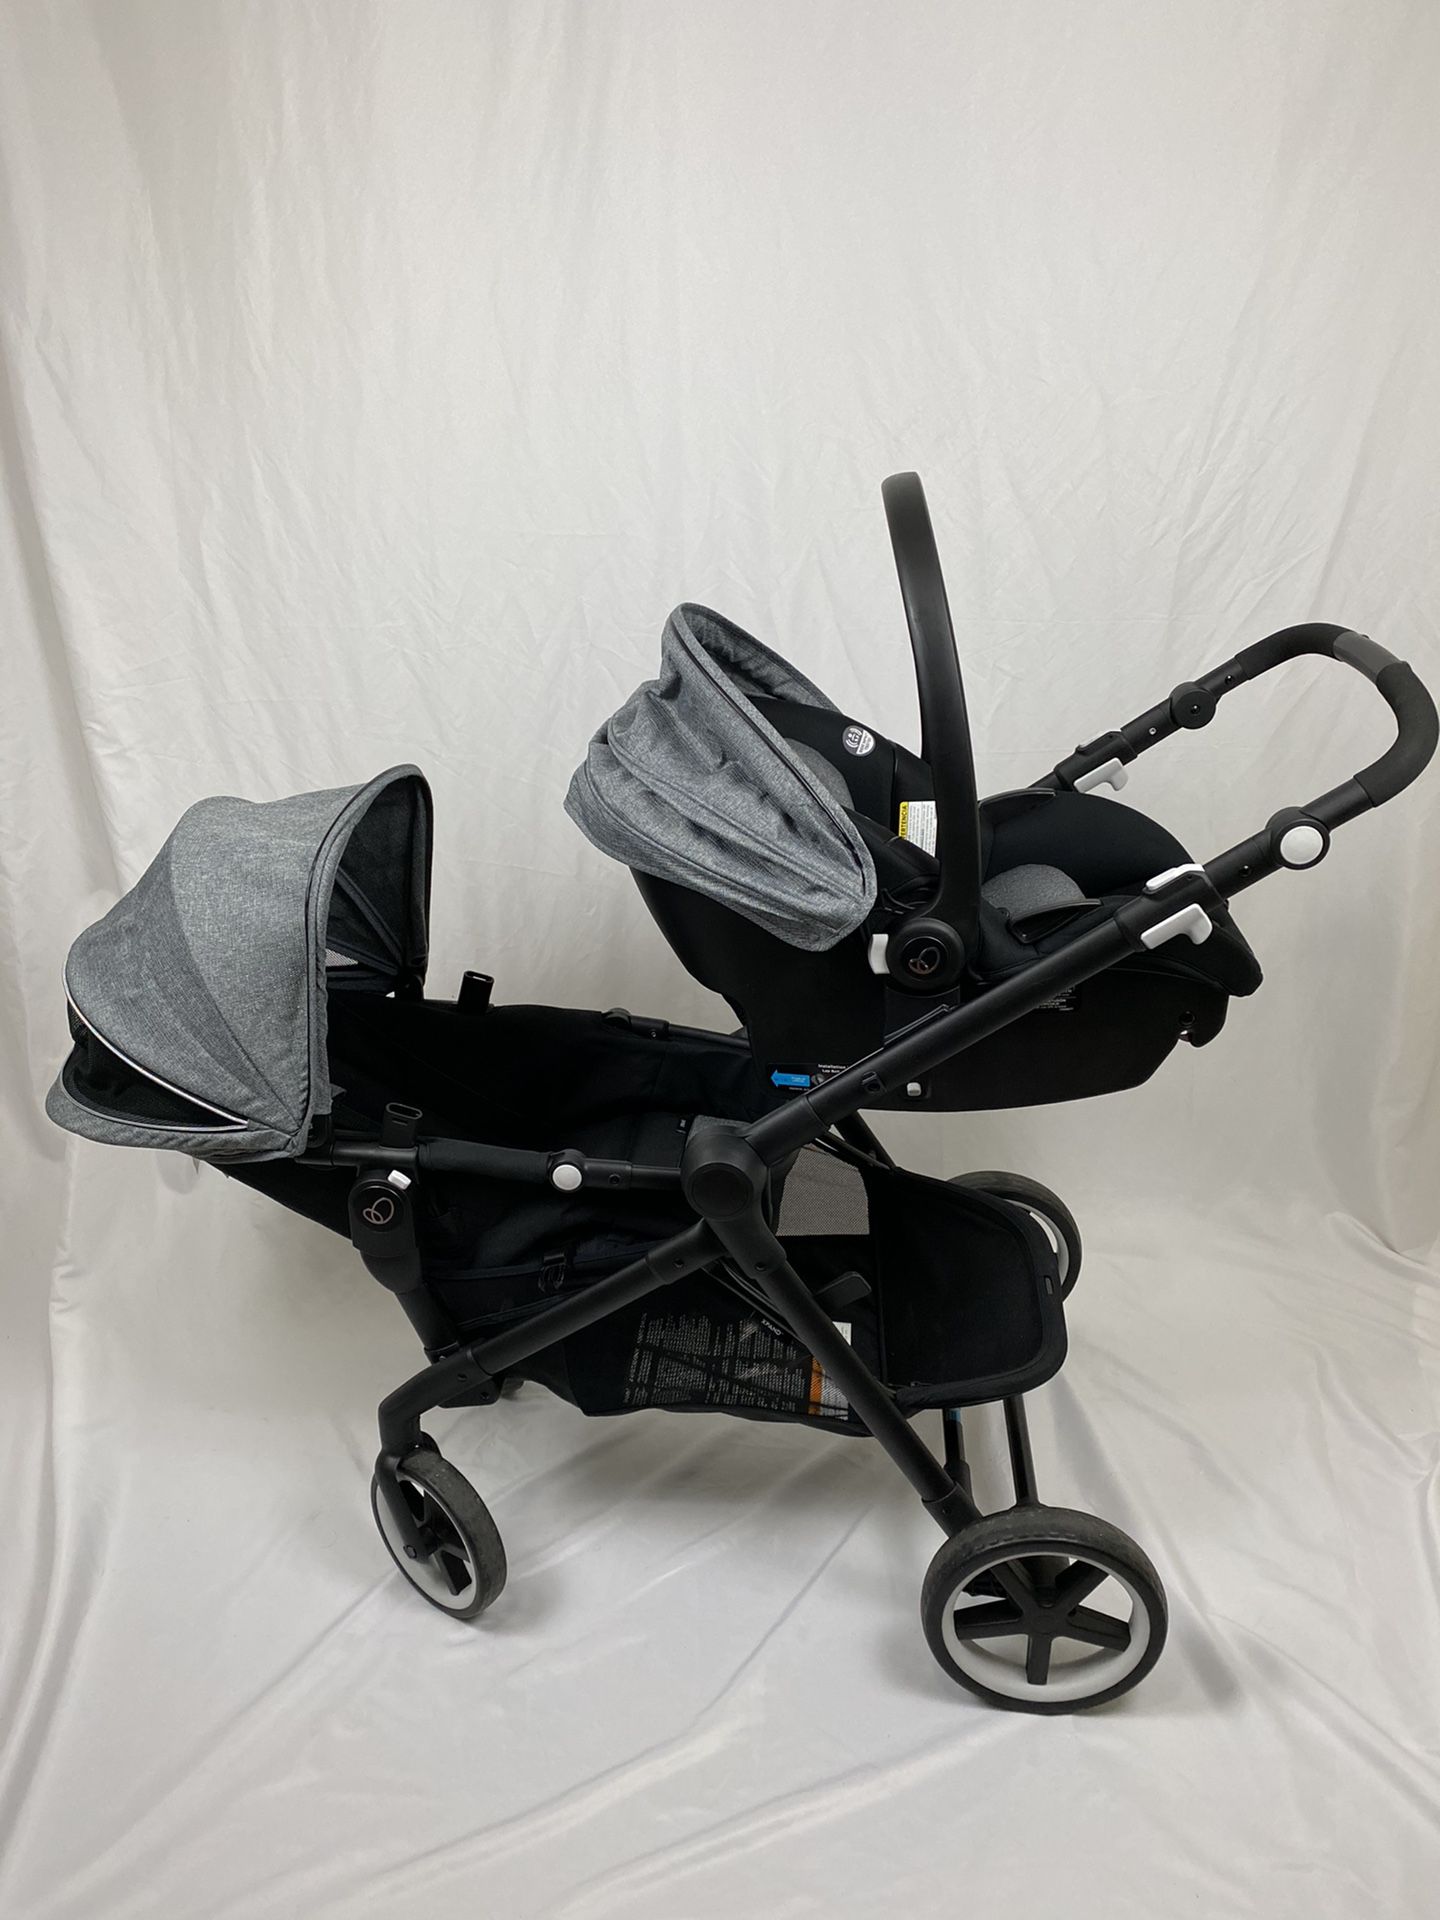 Evenflo Stroller Carriage Car Seat Pivot Xpand Travel System